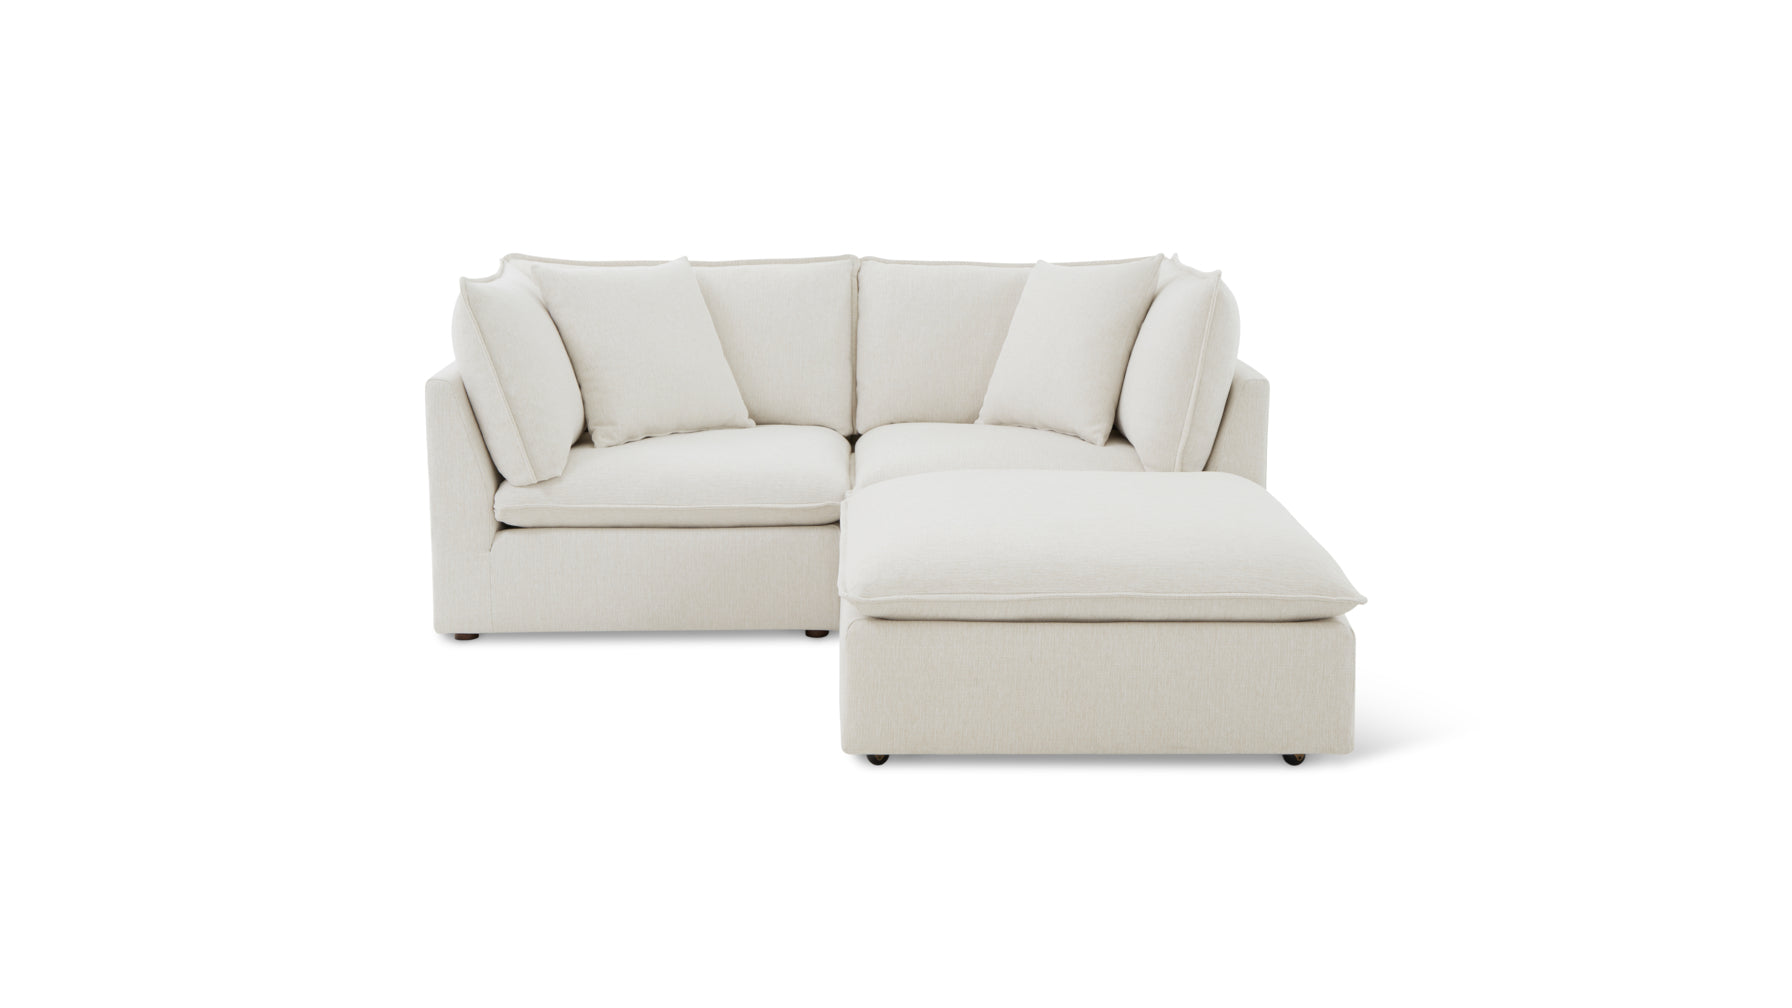 Chill Time 3-Piece Modular Sectional, Birch - Image 1